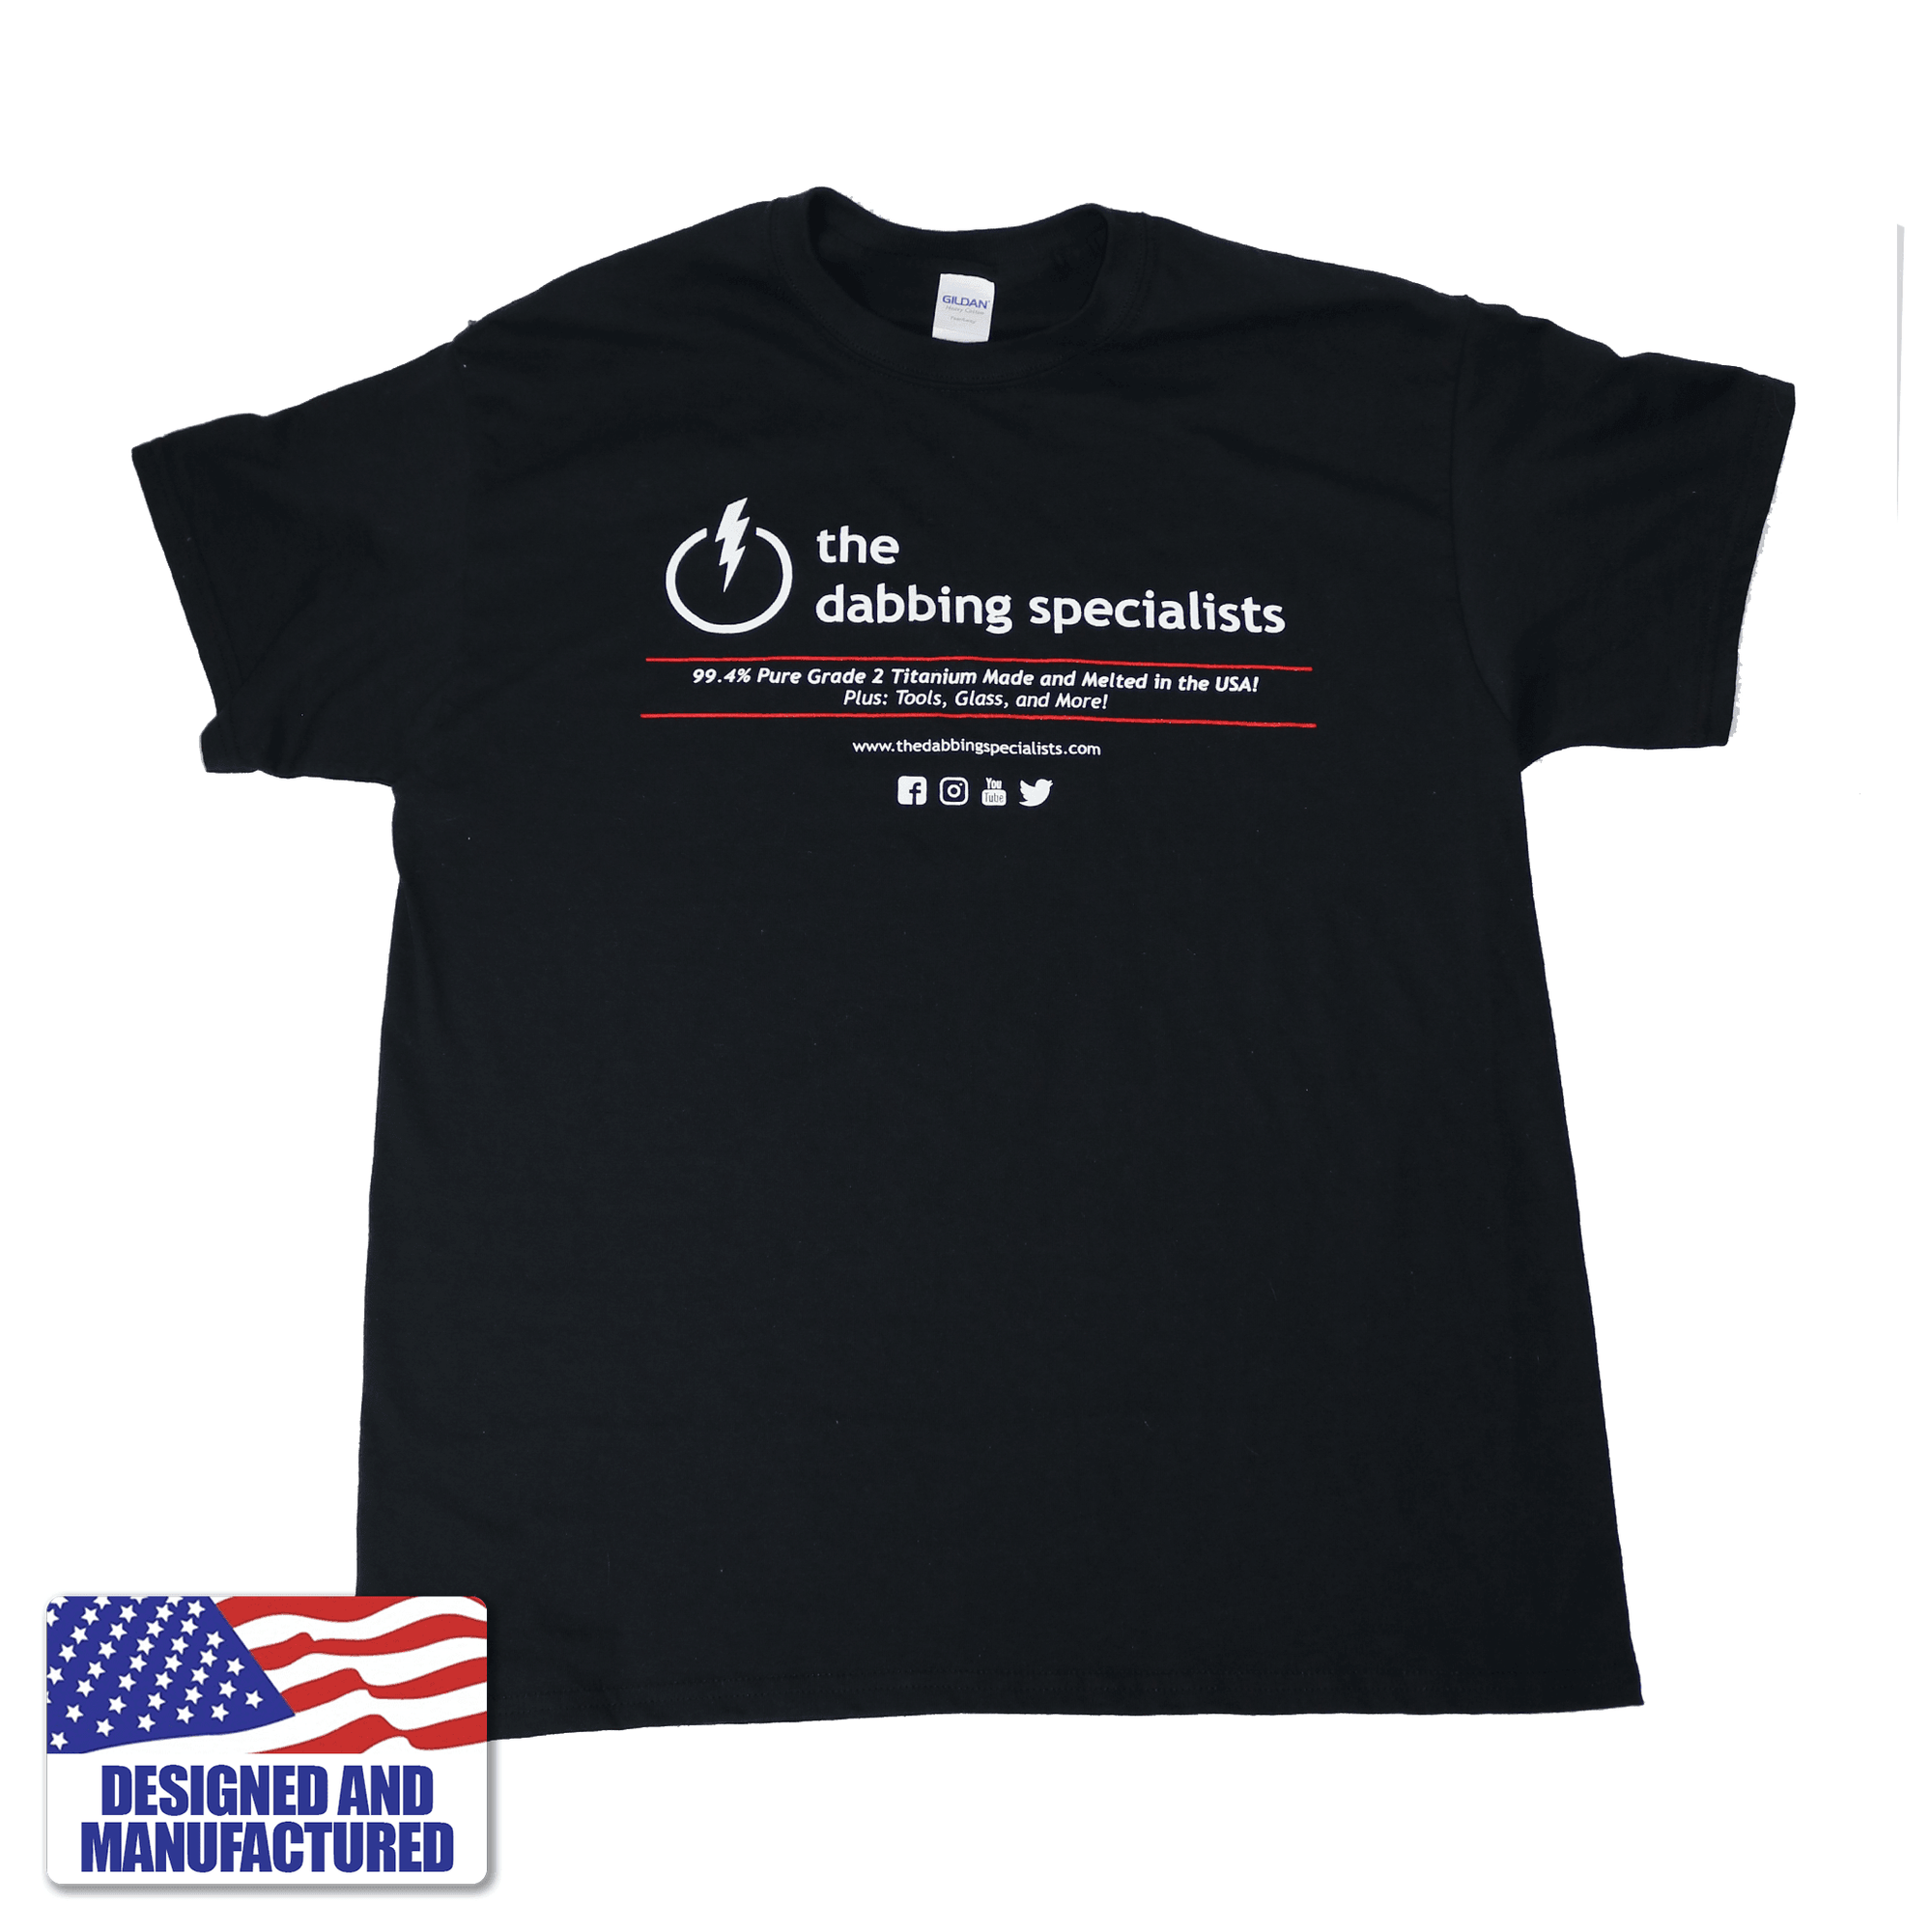 The Dabbing Specialists Motto Tee Shirt | Black T-Shirt View | the dabbing specialists